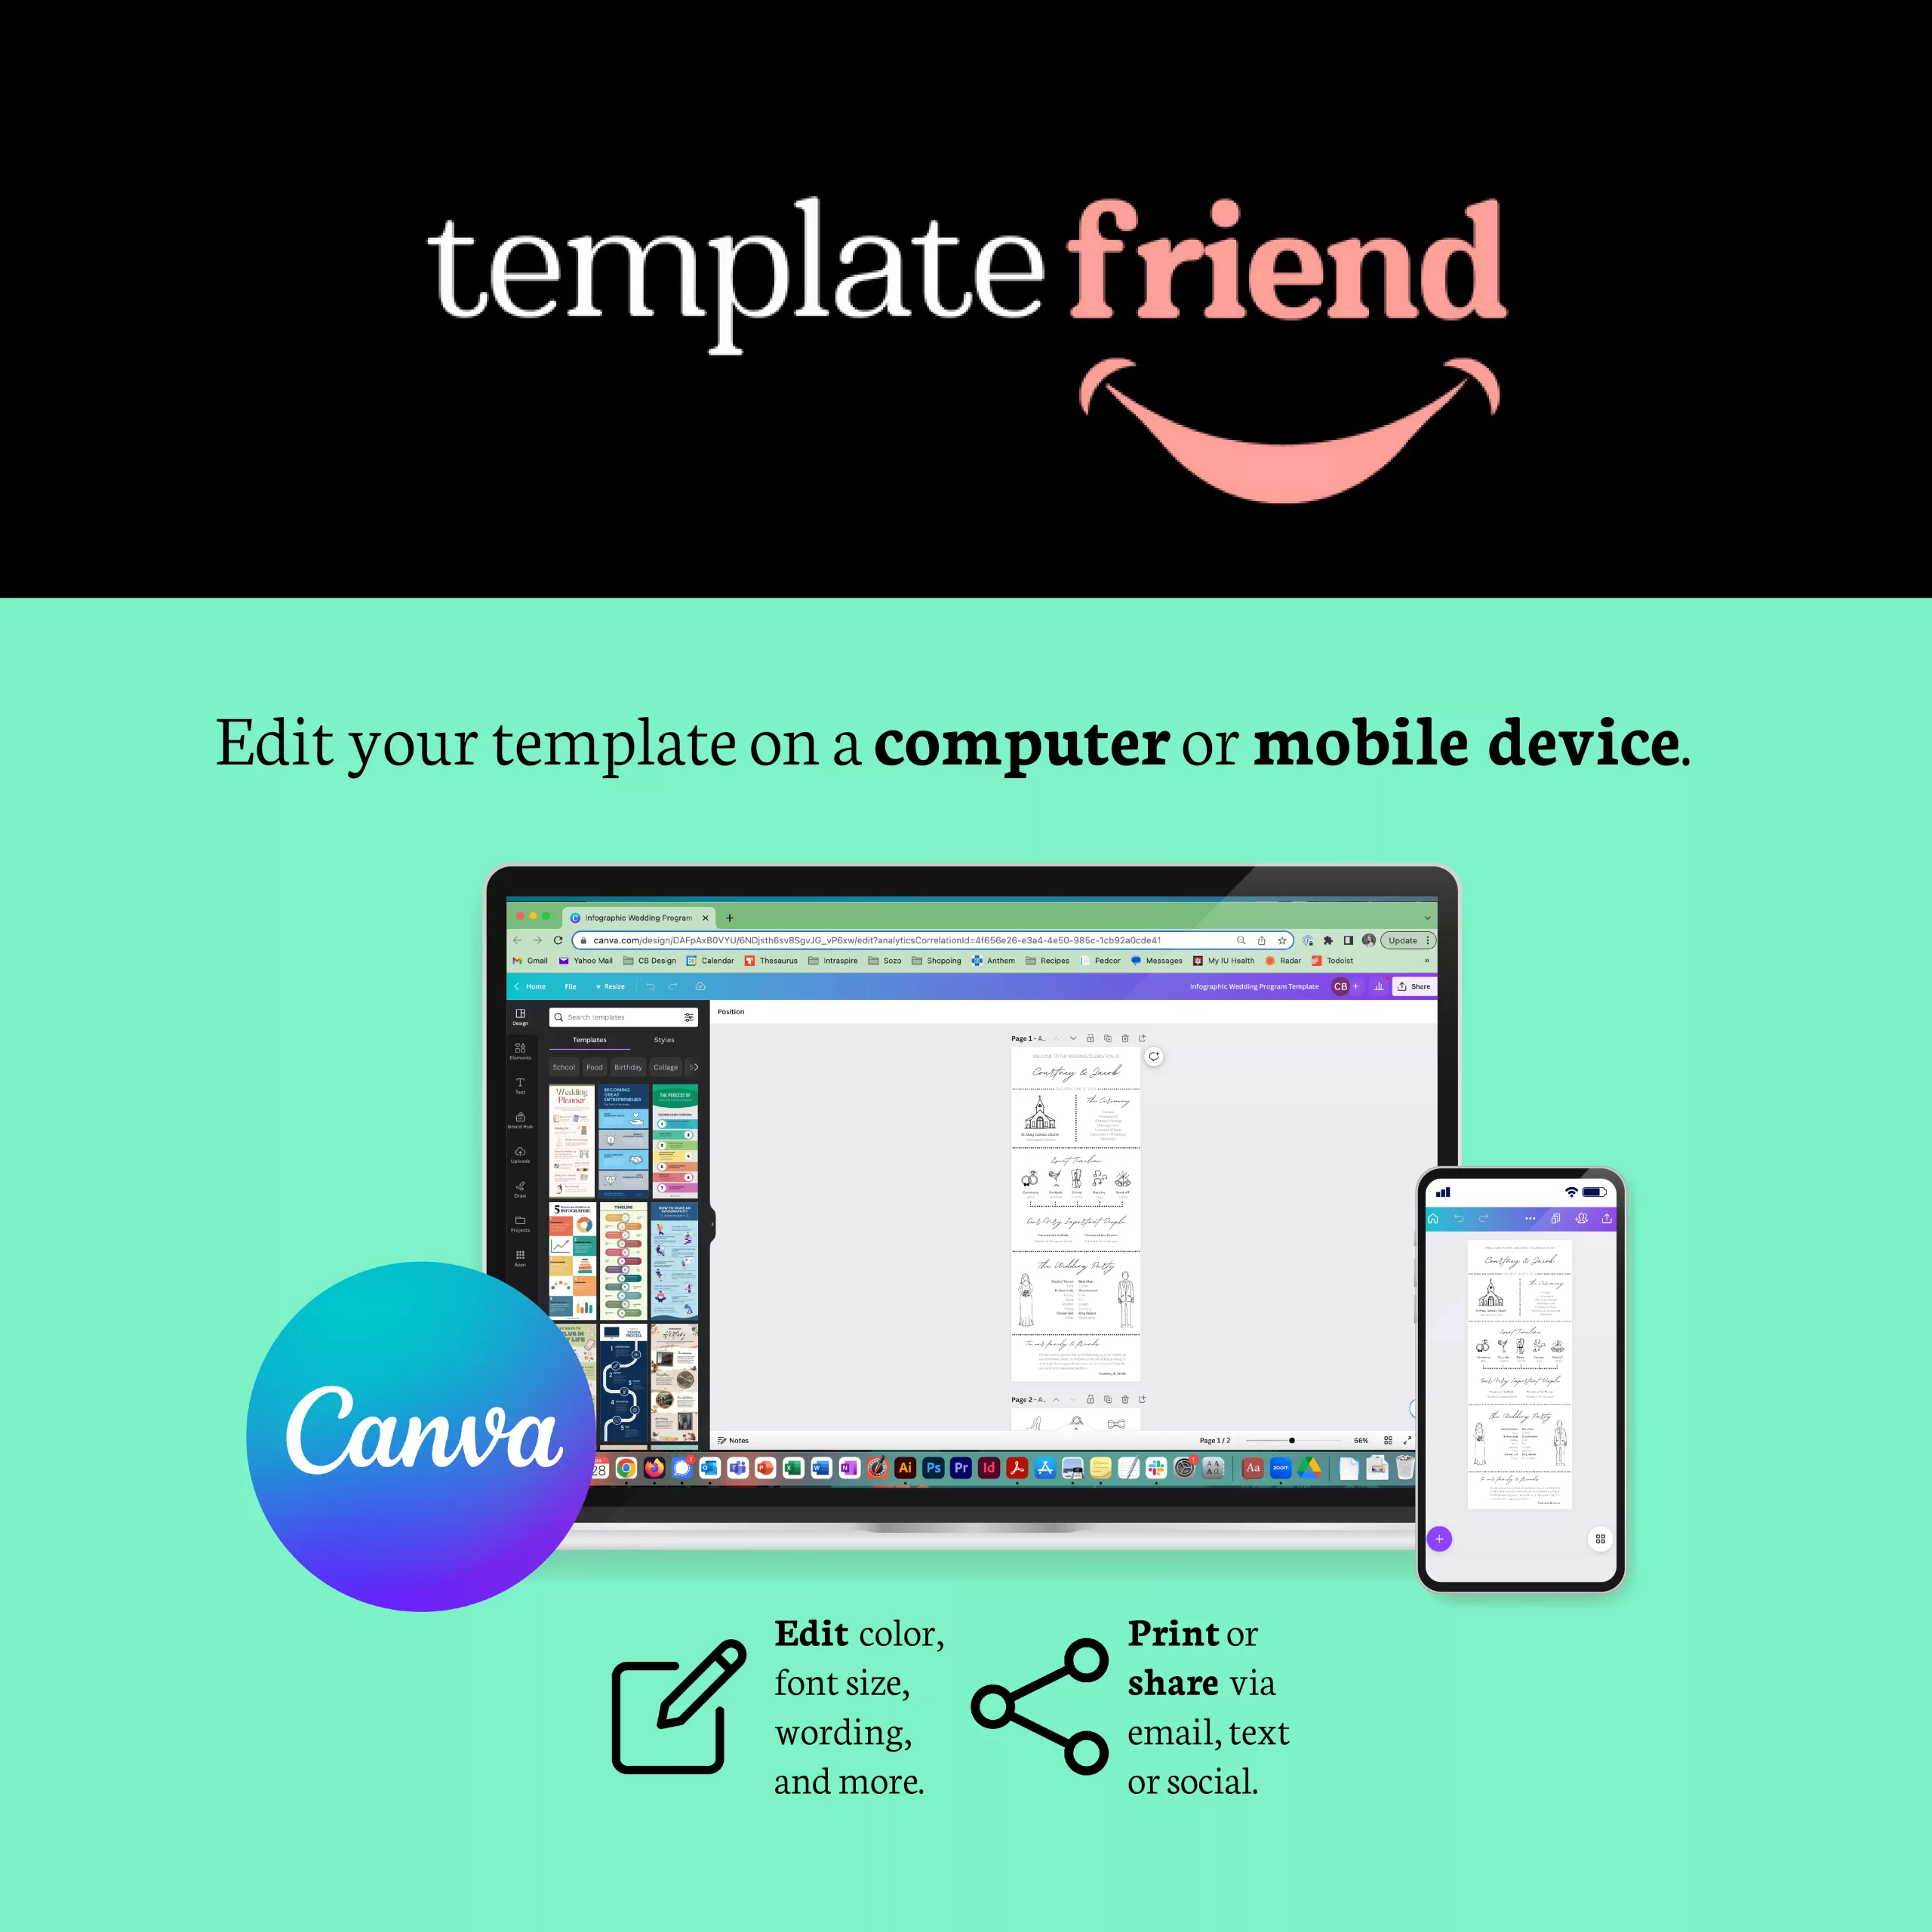 Edit Template Friend On Computer Or Mobile